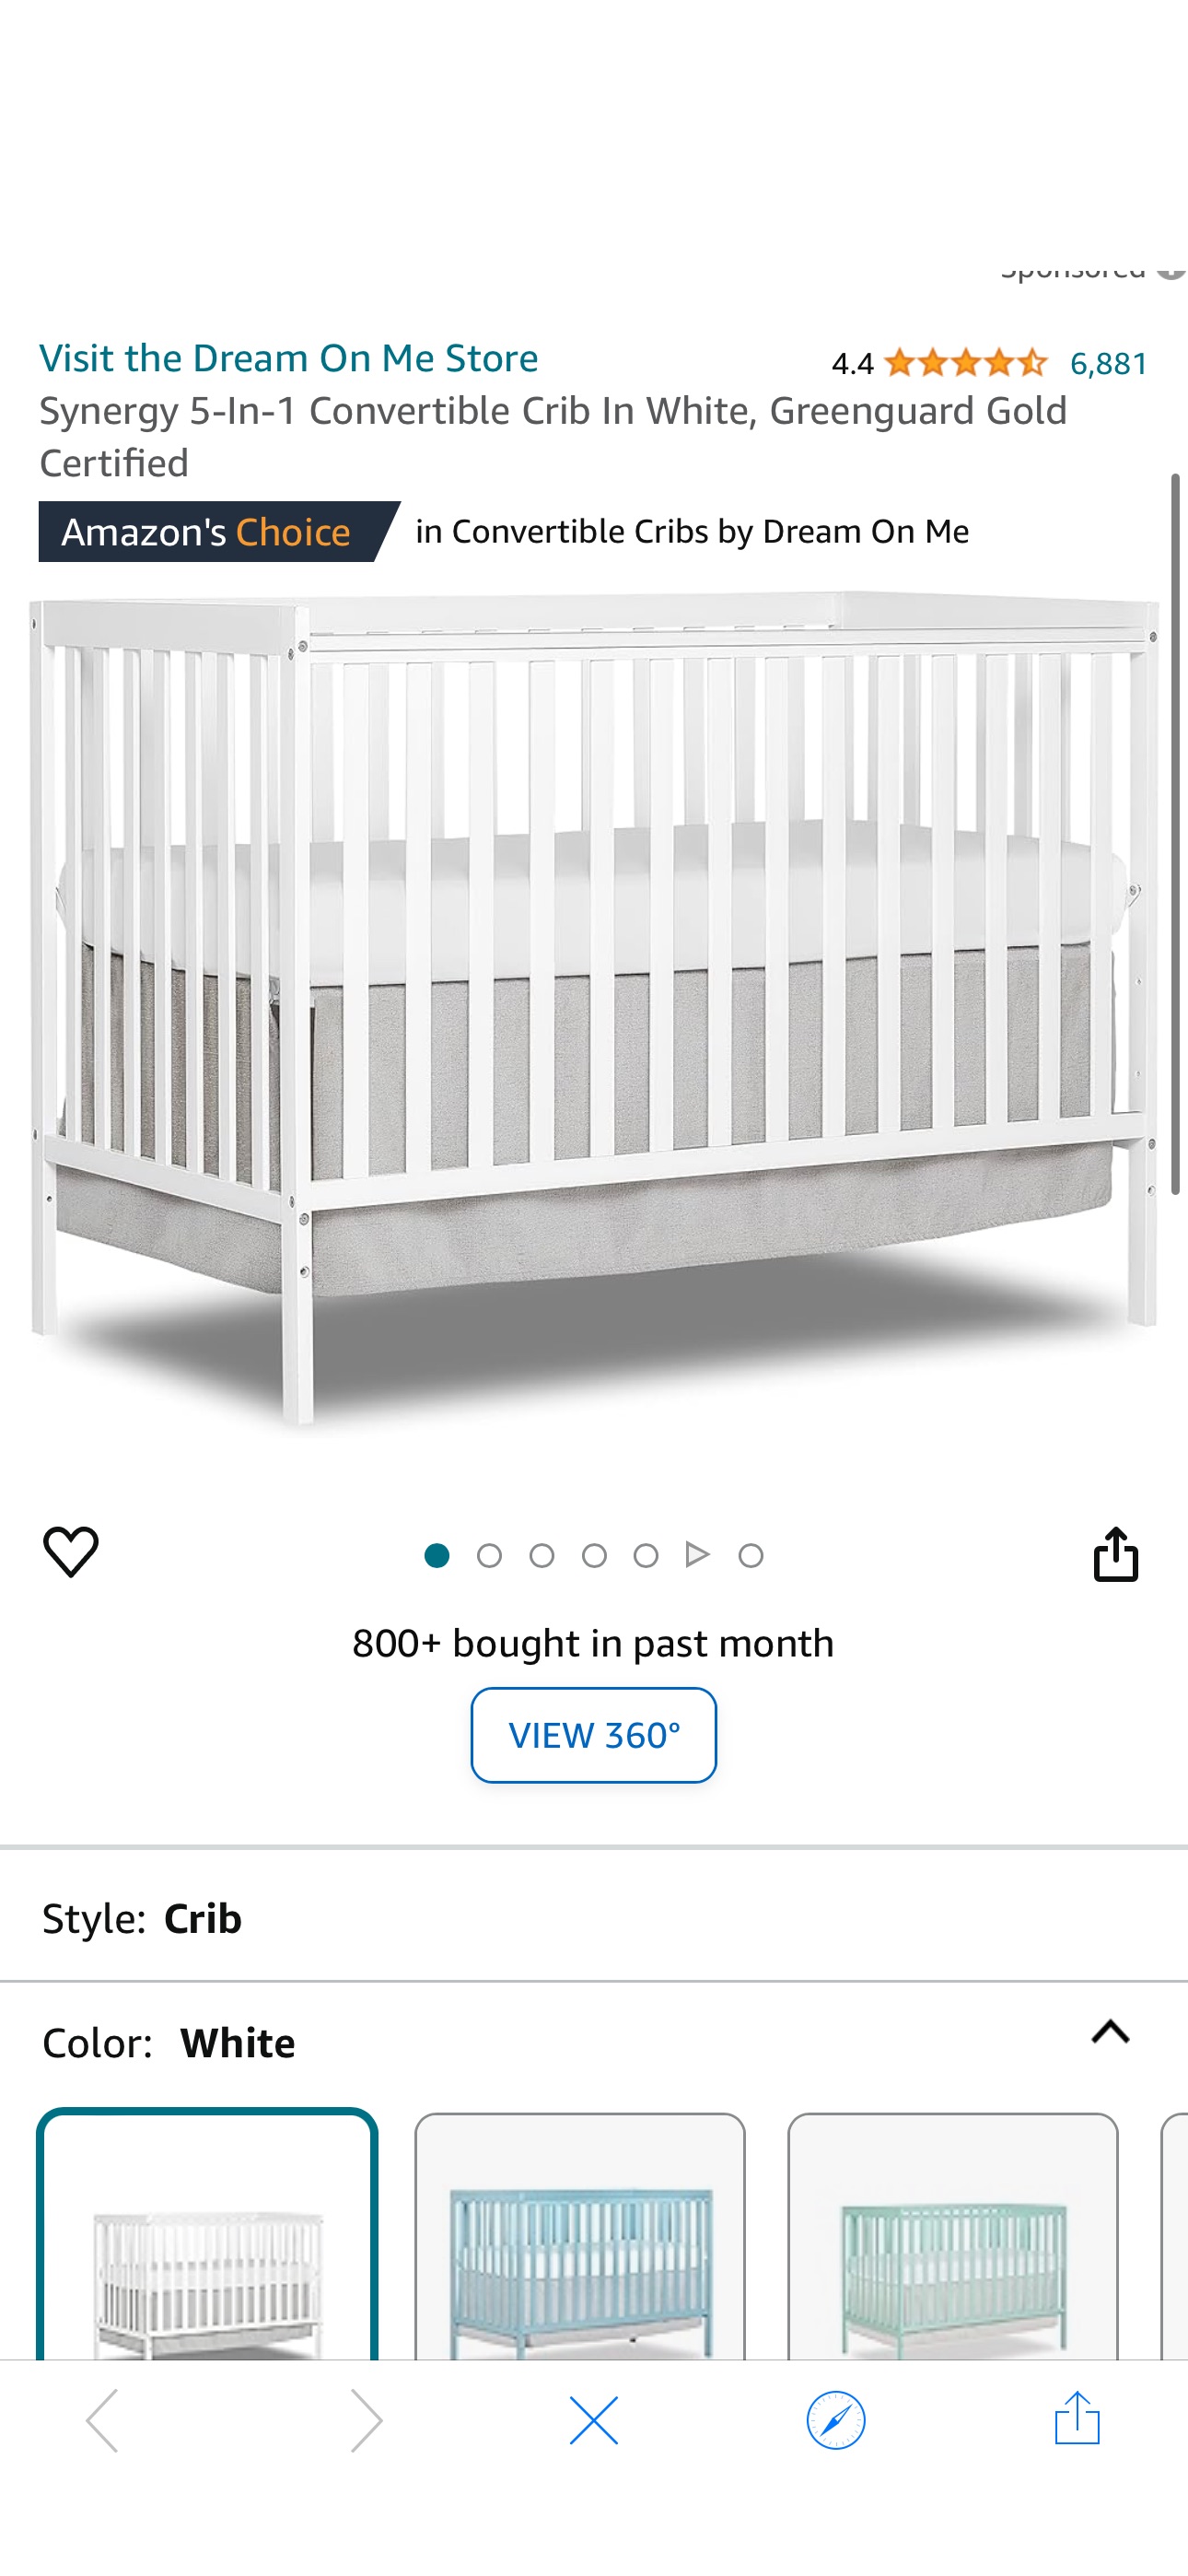 Amazon.com: Dream On Me Synergy 5-In-1 Convertible Crib In White, Greenguard Gold Certified : Everything Else